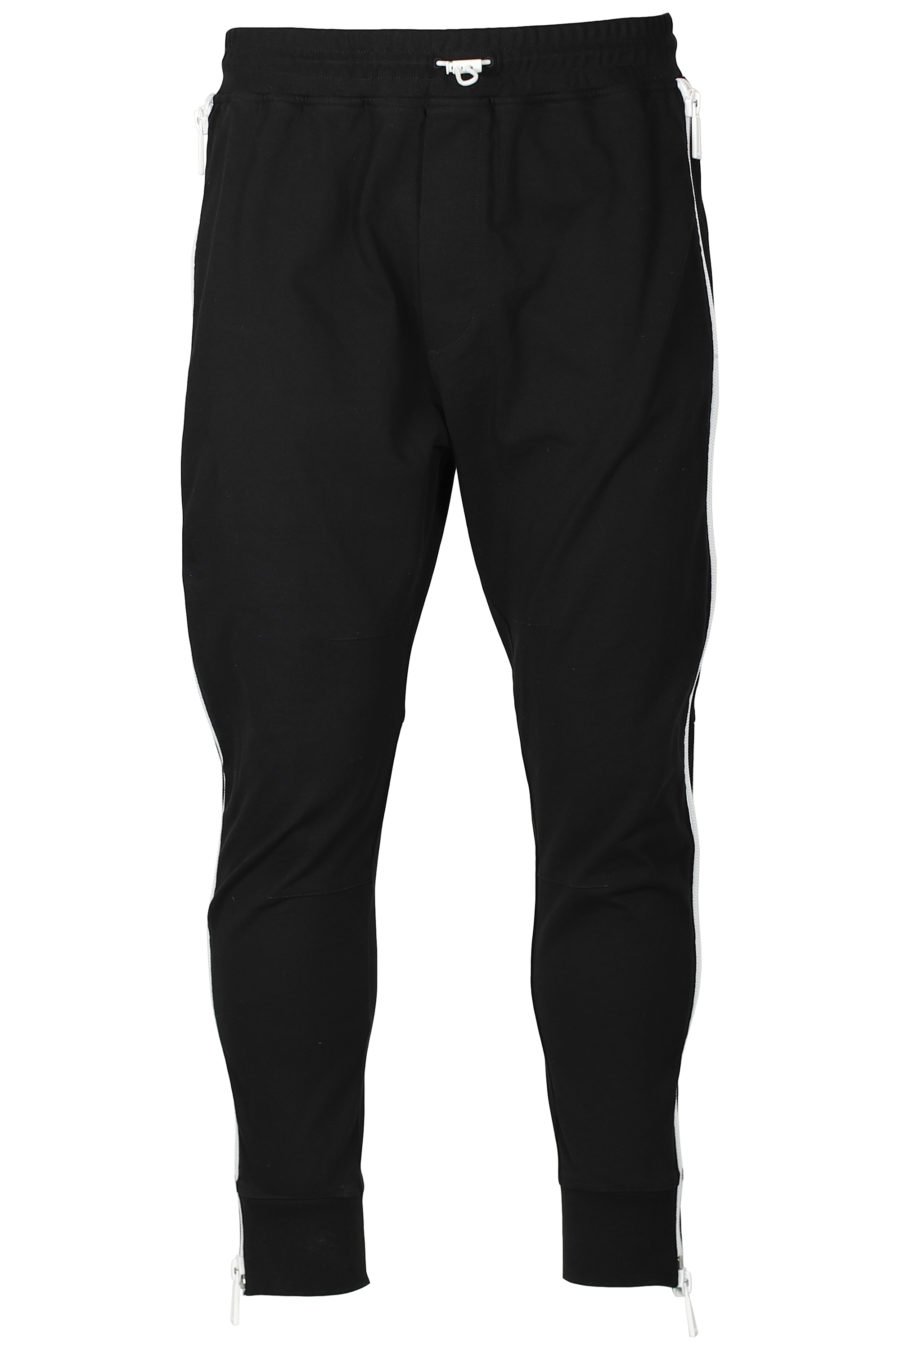 Tracksuit trousers with white zips - IMG 2689